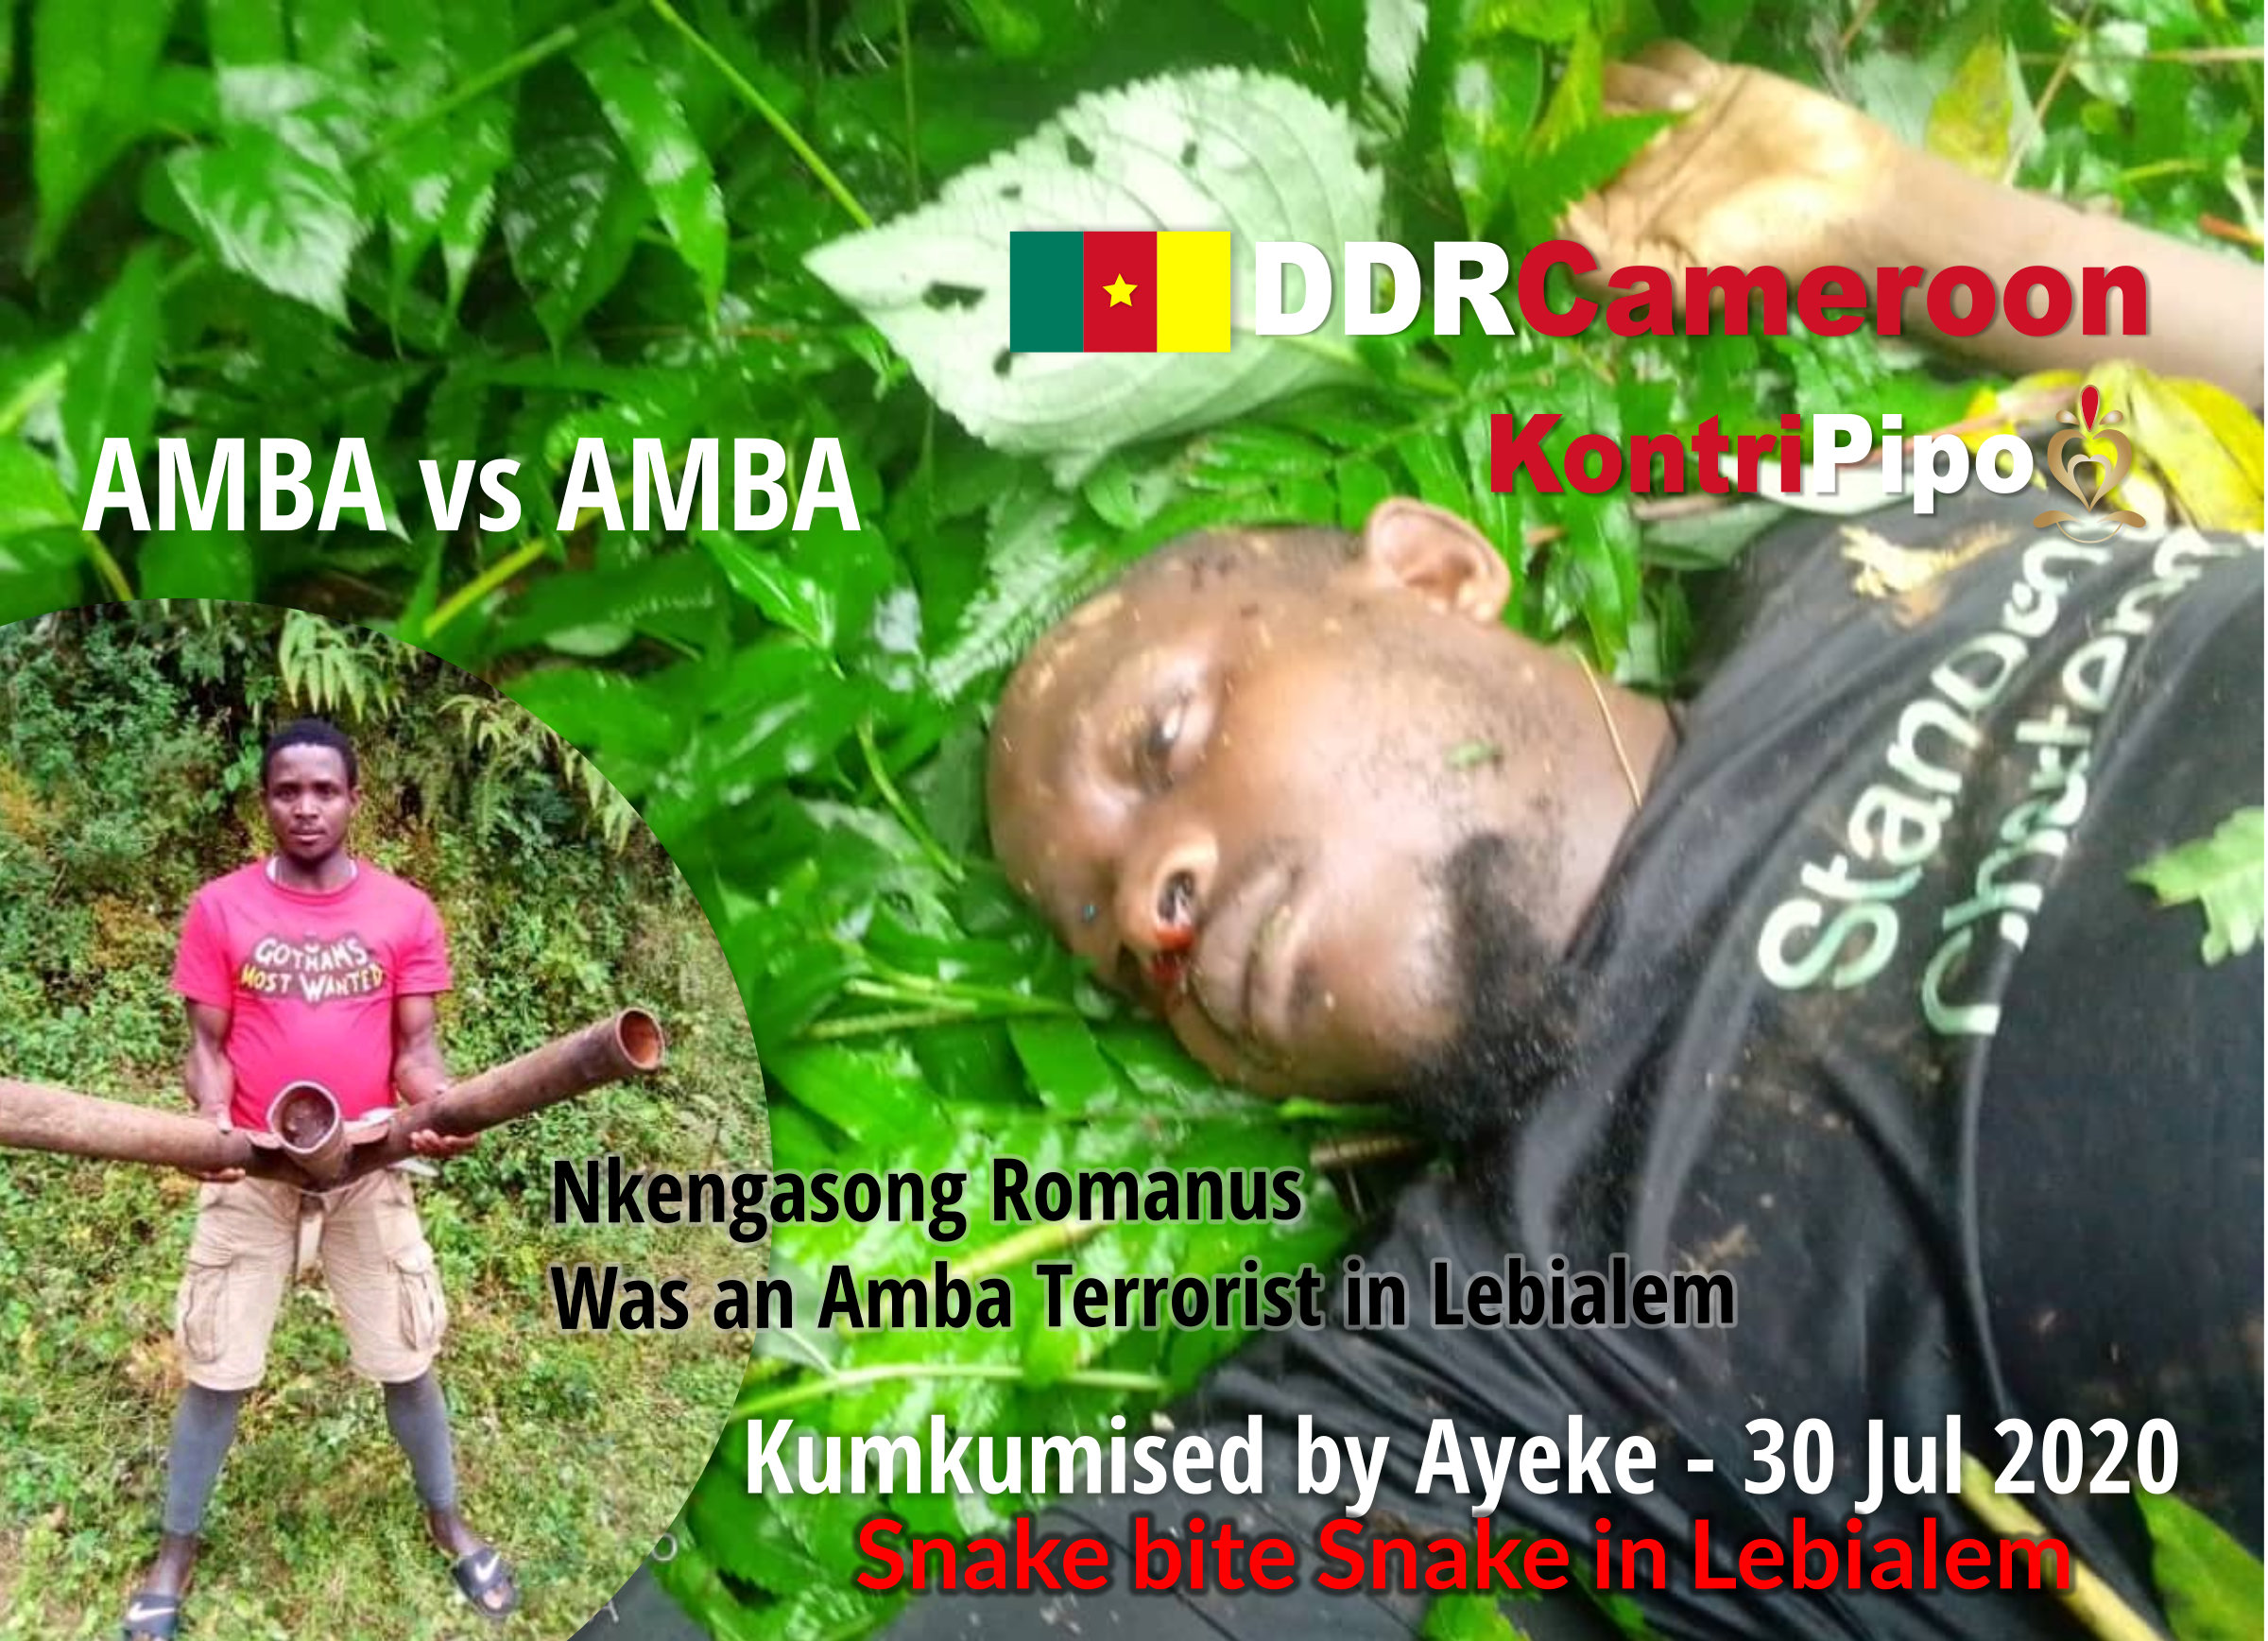 The notorious Ambazonia Terrorist called Nkengasong Romanus and his so-called body Guard have been Kumkumised by Ayeke, in Lebialem, 30 July 2020.